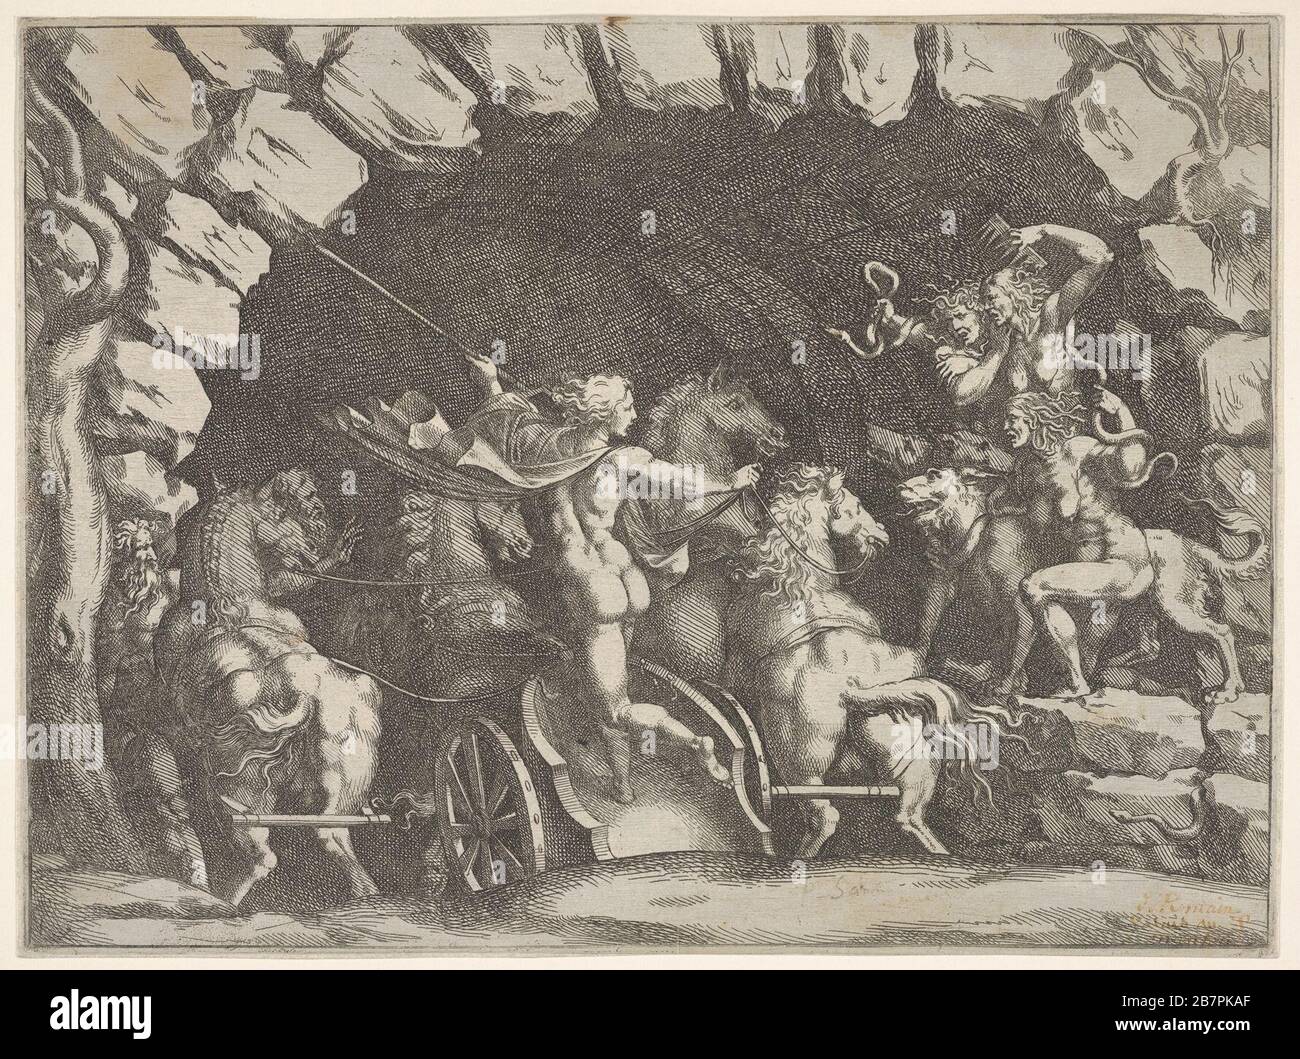 Pluto, seen from behind, entering the Underwold on his chairot, Cereberus and three Furies to right, from 'Giove che fulmina li giganti', after the frescoes on the ceiling of the Sala dei Giganti designed by Giulio Romano for the Palazzo del Te, Mantua, ca. 1680. After Giulio Romano Stock Photo